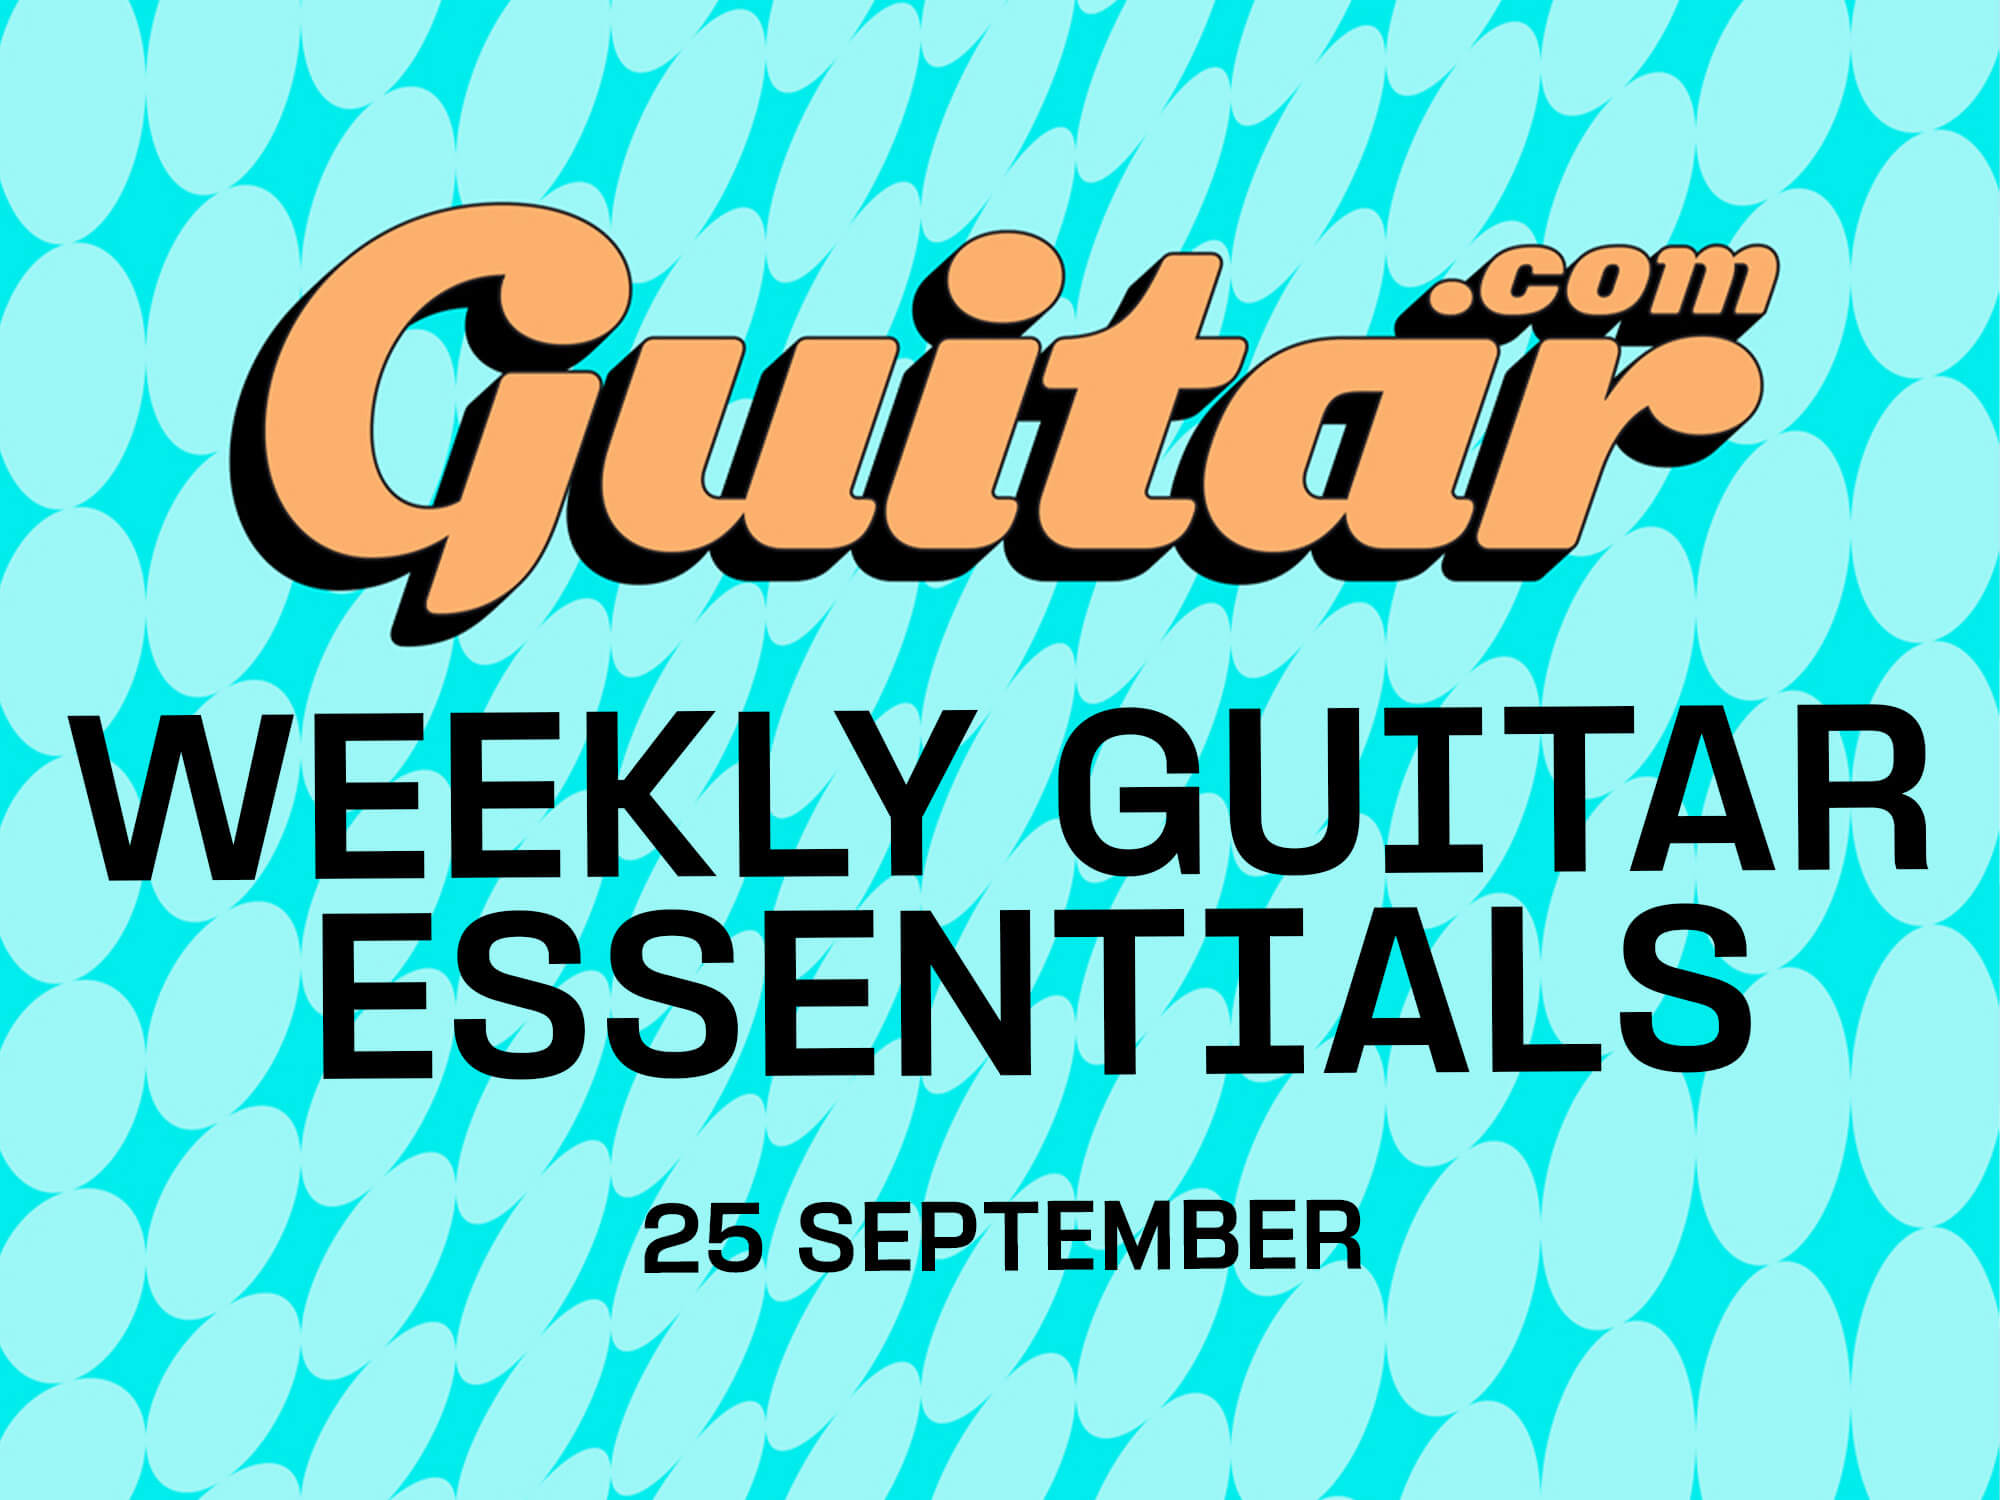 The Weekly Guitar Essentials, 25 September